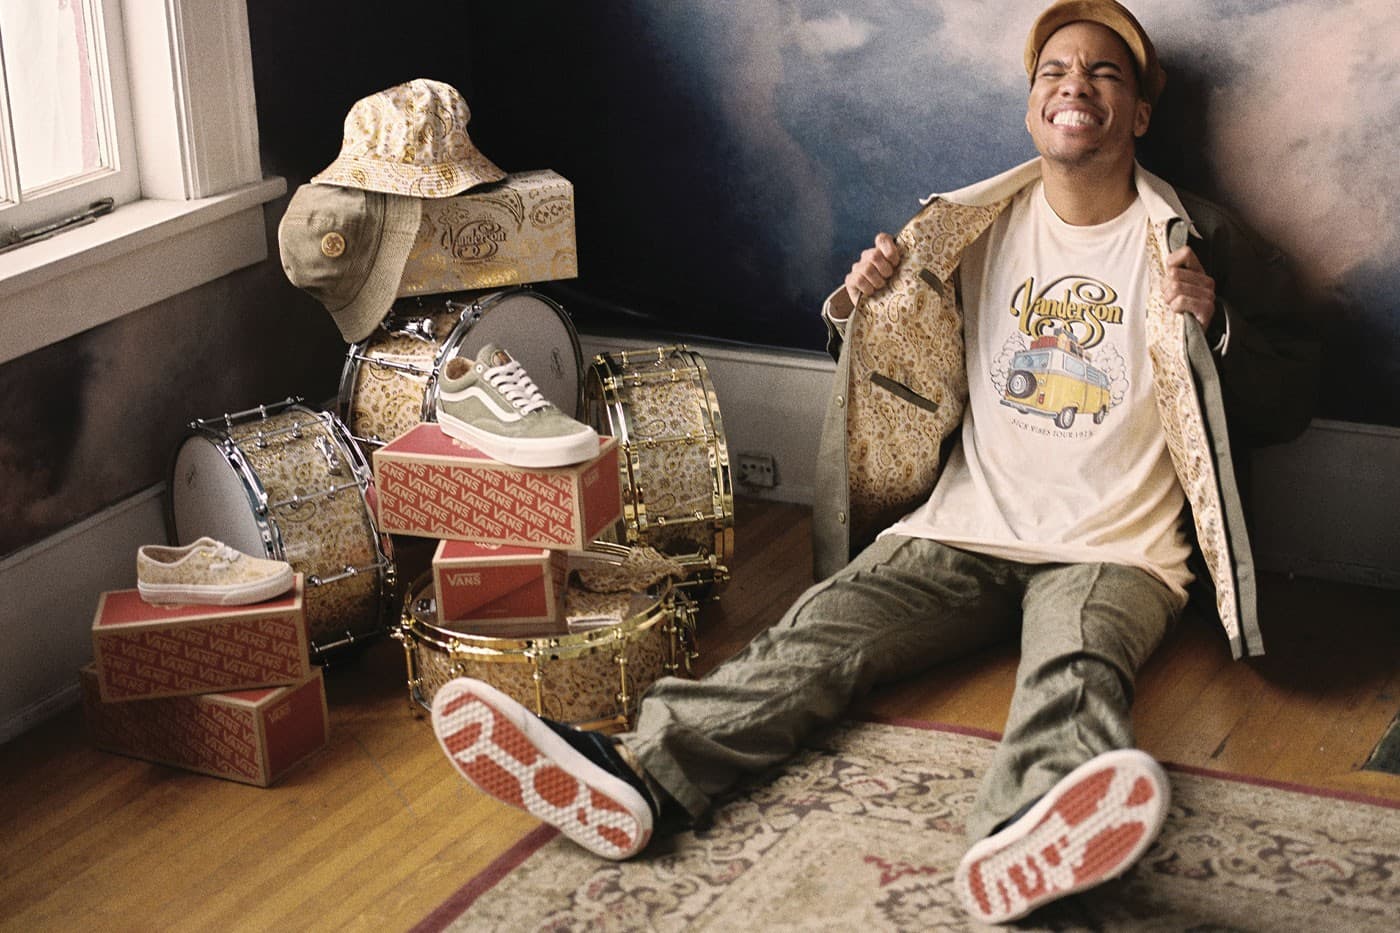 vans-anderson-paak-collab-collection-release-info-001.jpg